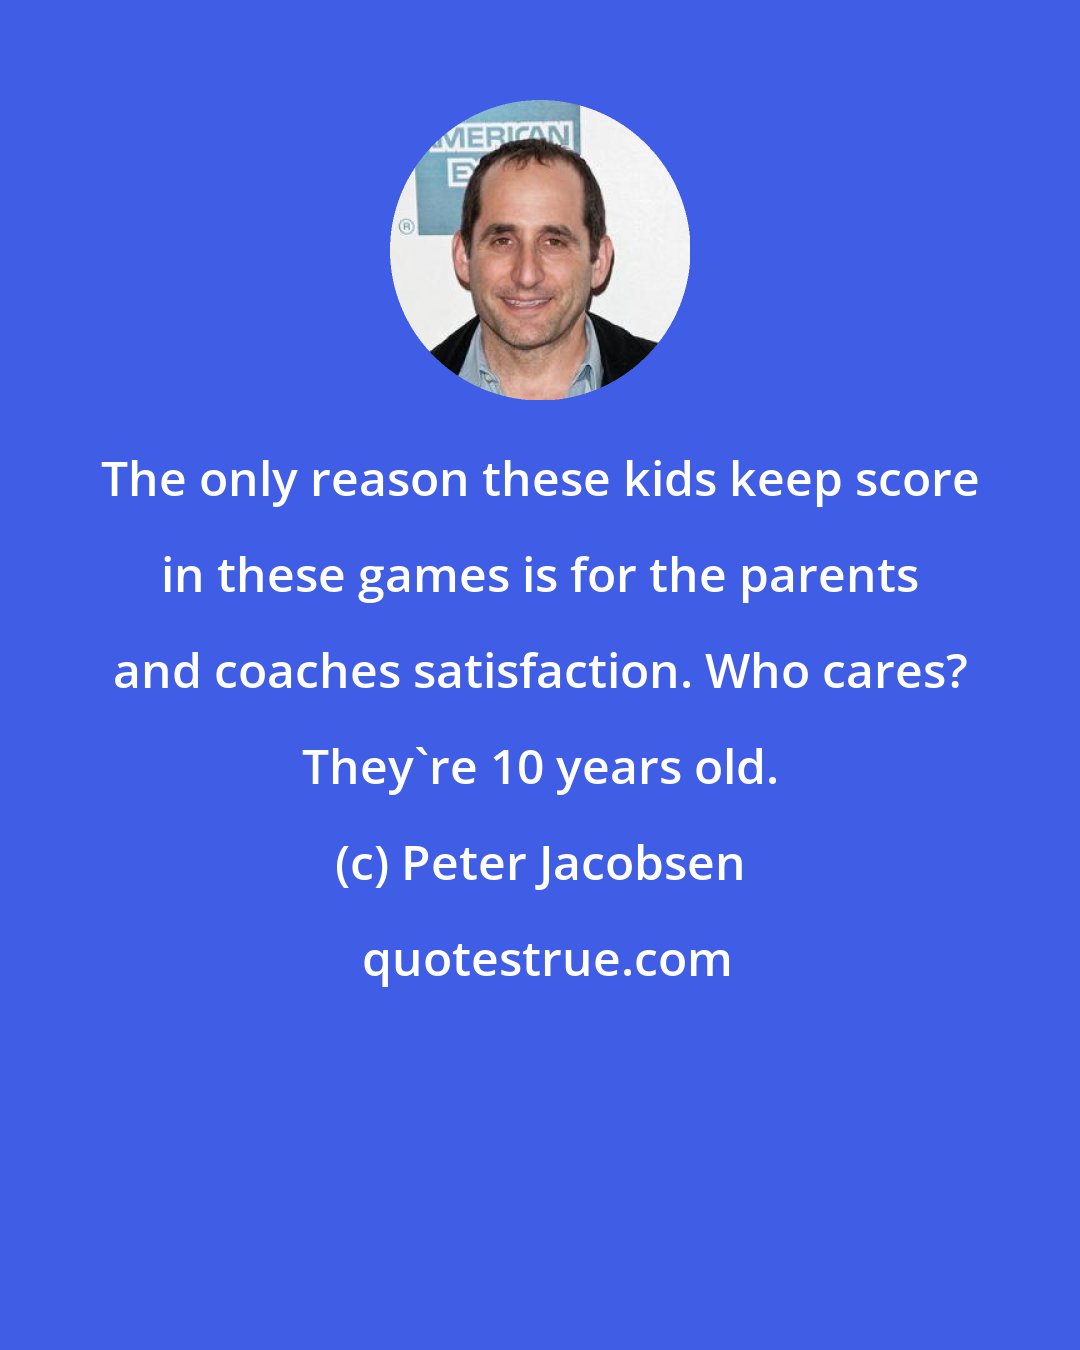 Peter Jacobsen: The only reason these kids keep score in these games is for the parents and coaches satisfaction. Who cares? They're 10 years old.